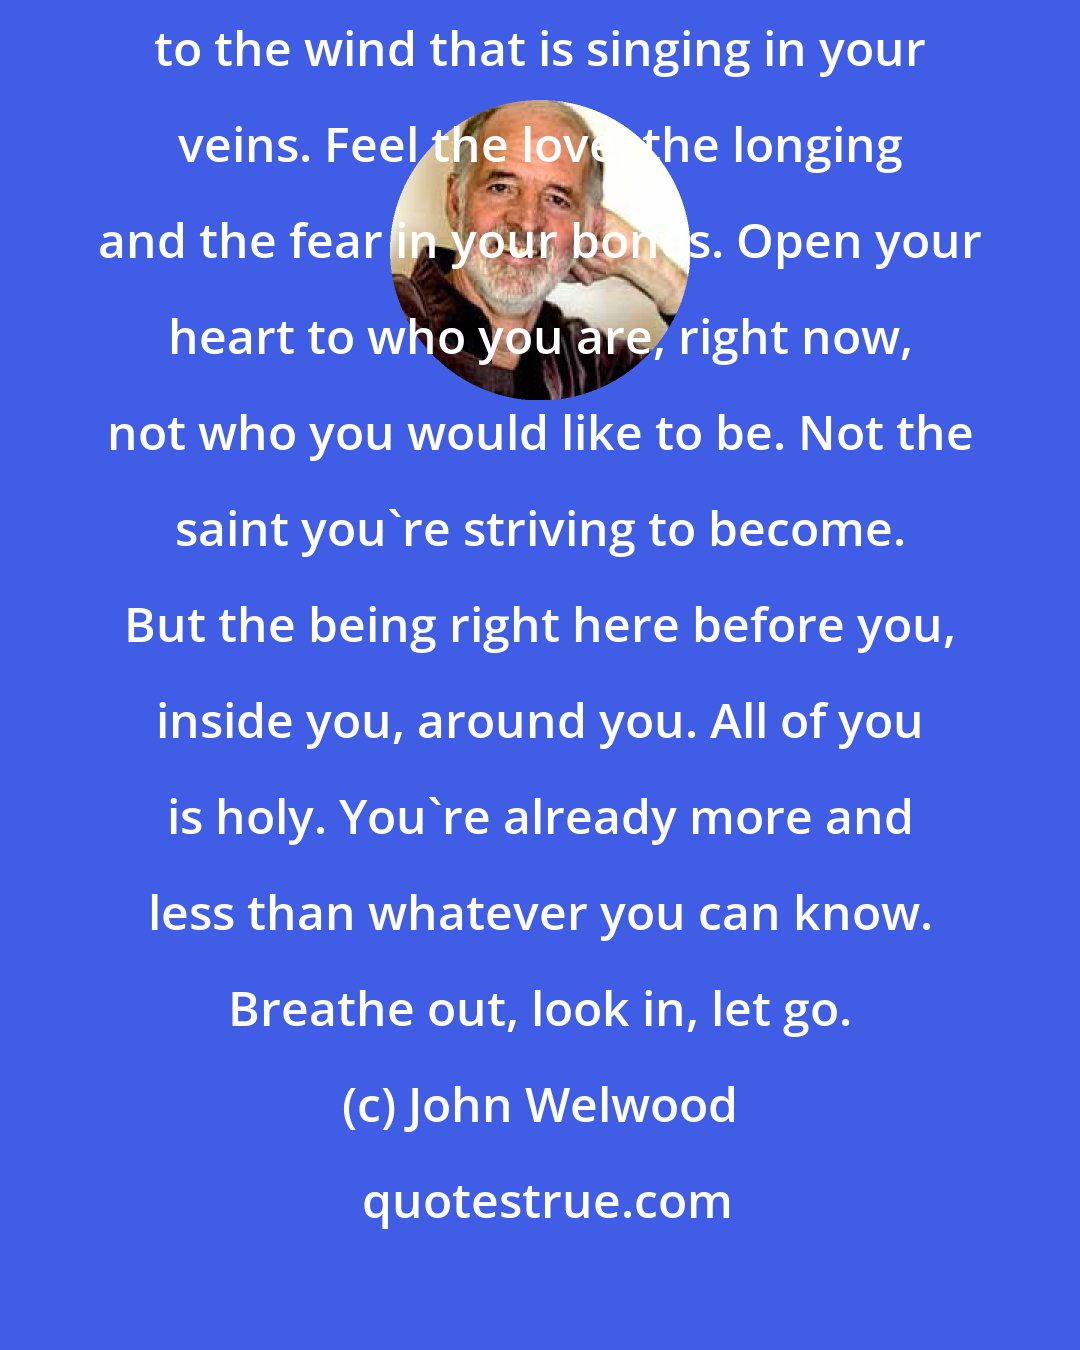 John Welwood: Forget about enlightenment. Sit down wherever you are and listen to the wind that is singing in your veins. Feel the love, the longing and the fear in your bones. Open your heart to who you are, right now, not who you would like to be. Not the saint you're striving to become. But the being right here before you, inside you, around you. All of you is holy. You're already more and less than whatever you can know. Breathe out, look in, let go.